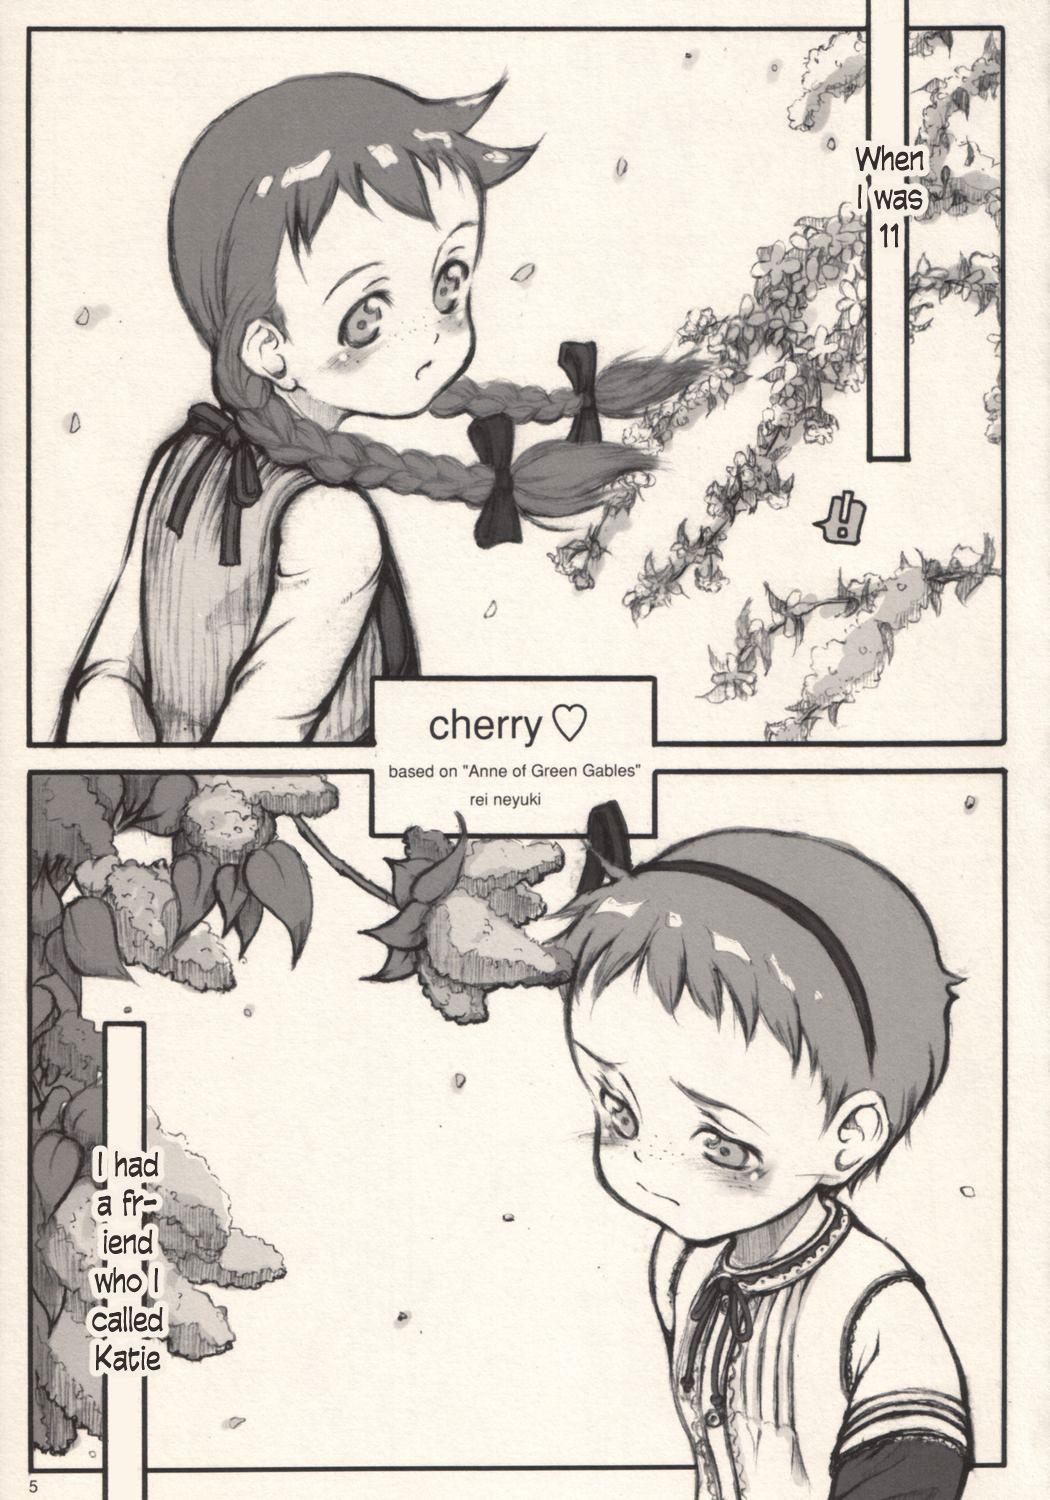 Car cherry - World masterpiece theater Anne of green gables | akage no anne Negro - Page 4